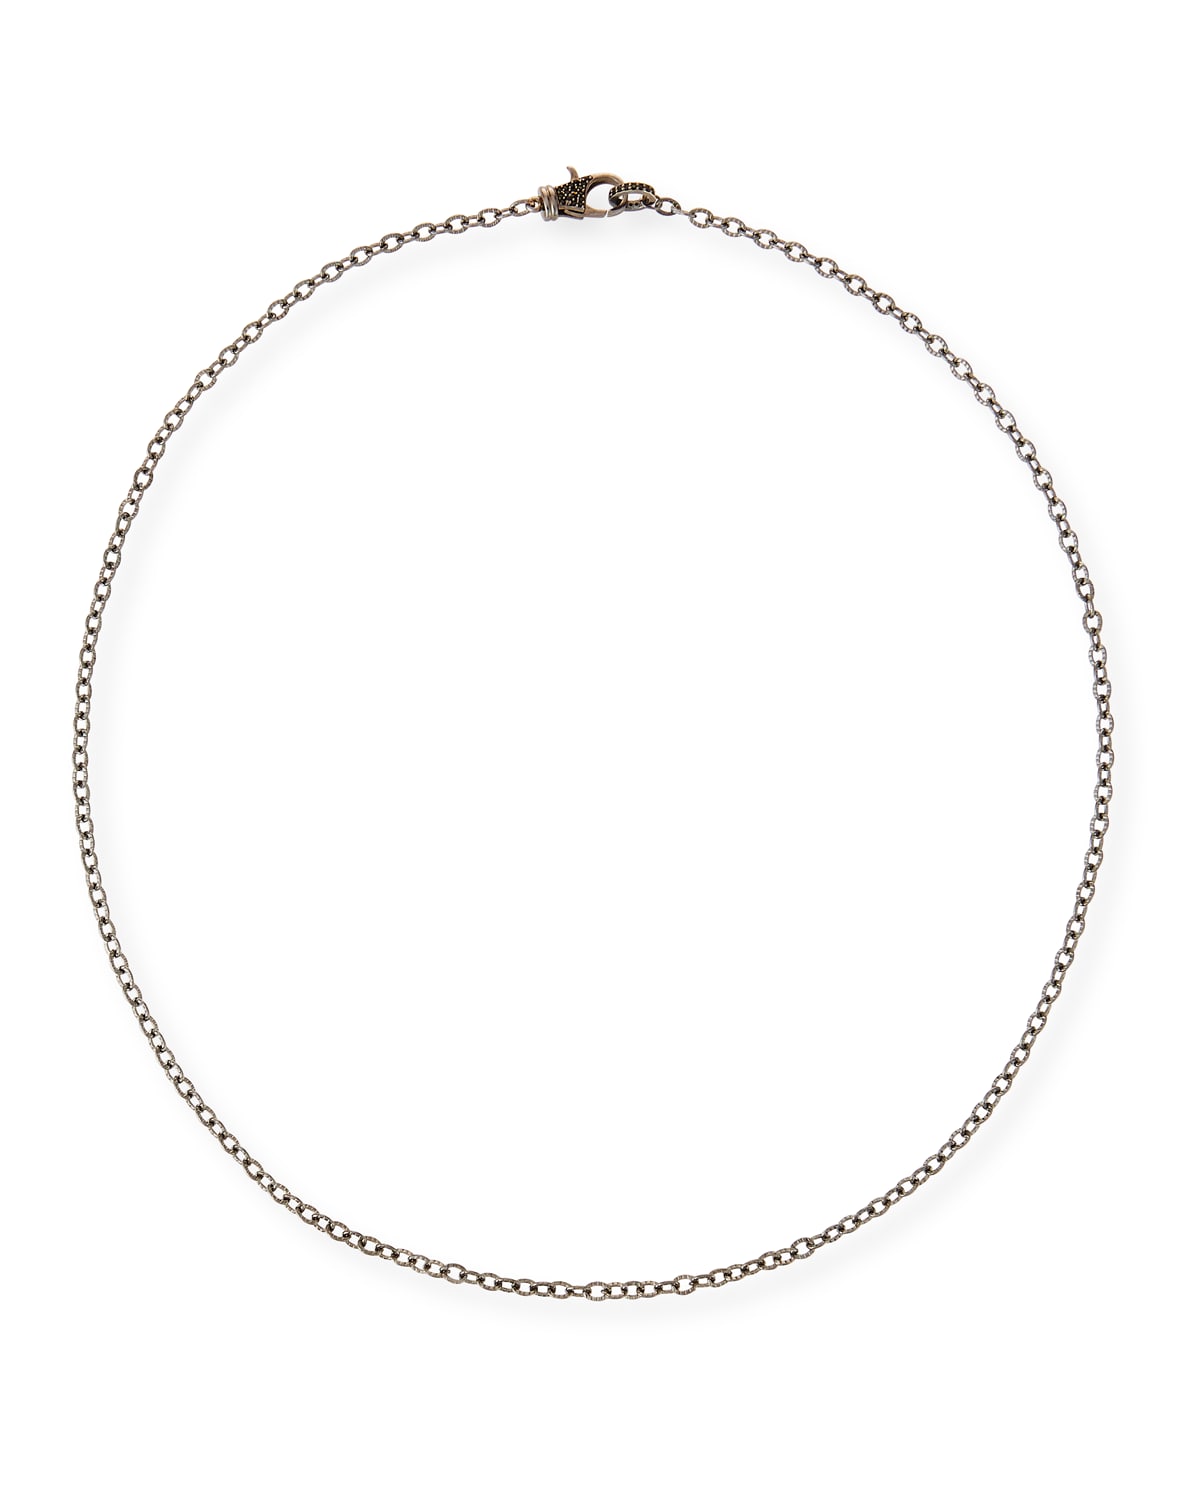 Margo Morrison Rhodium-plated Sterling Silver Chain Necklace With Spinel Clasp, 24"